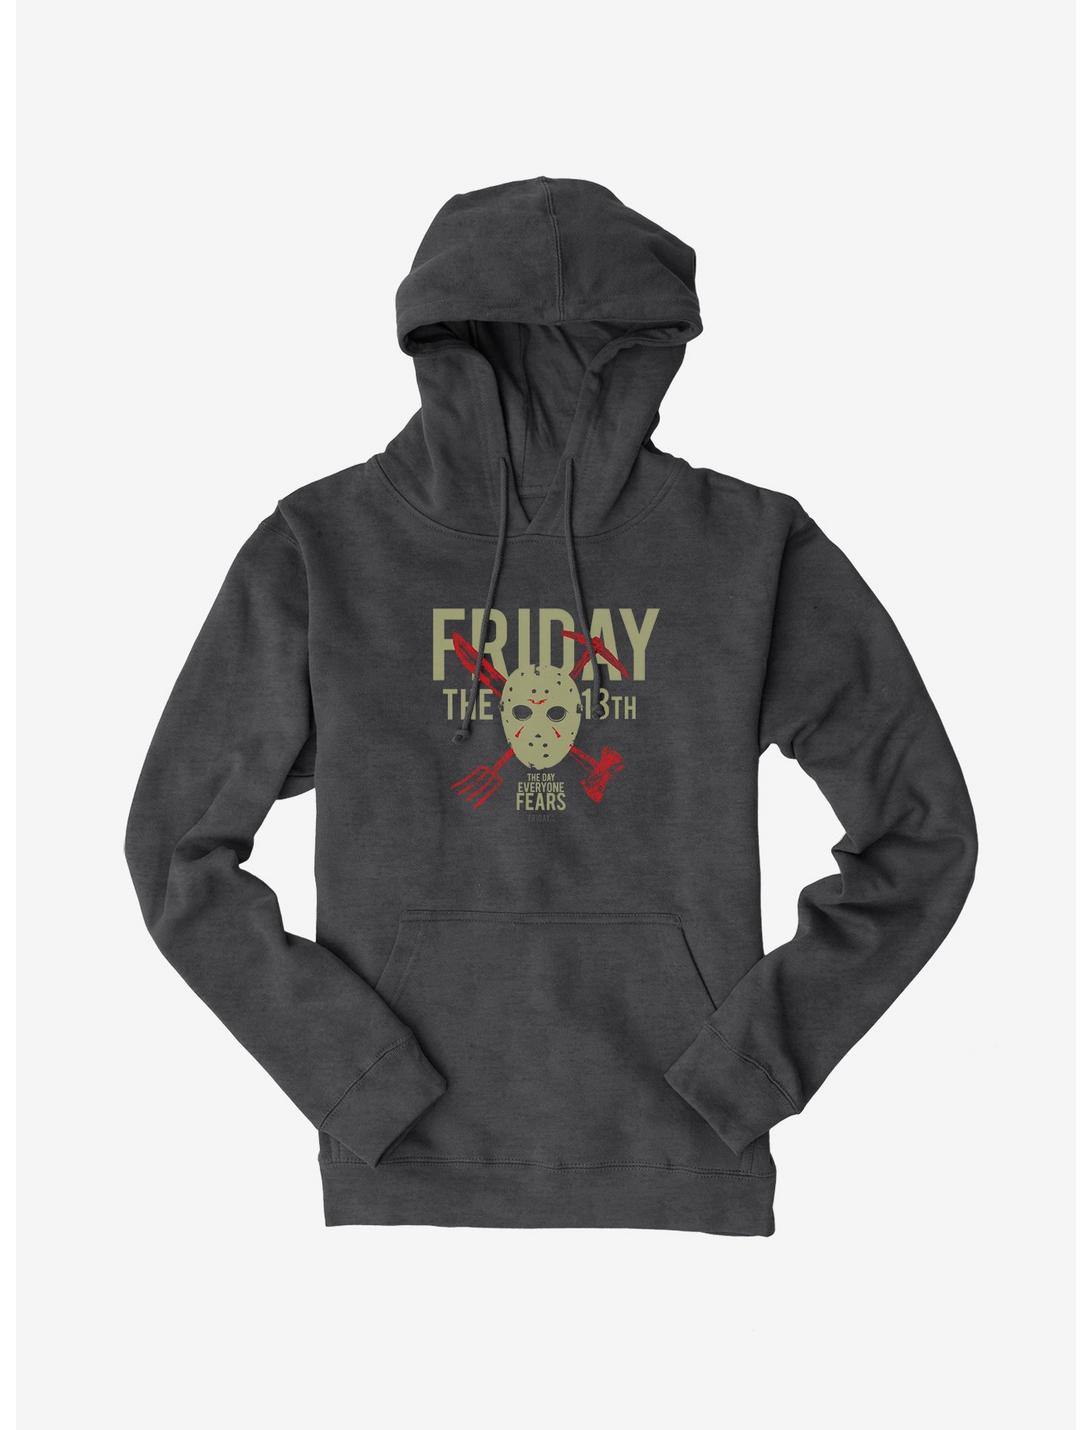 Friday The 13th Everyone Fears Hoodie, , hi-res